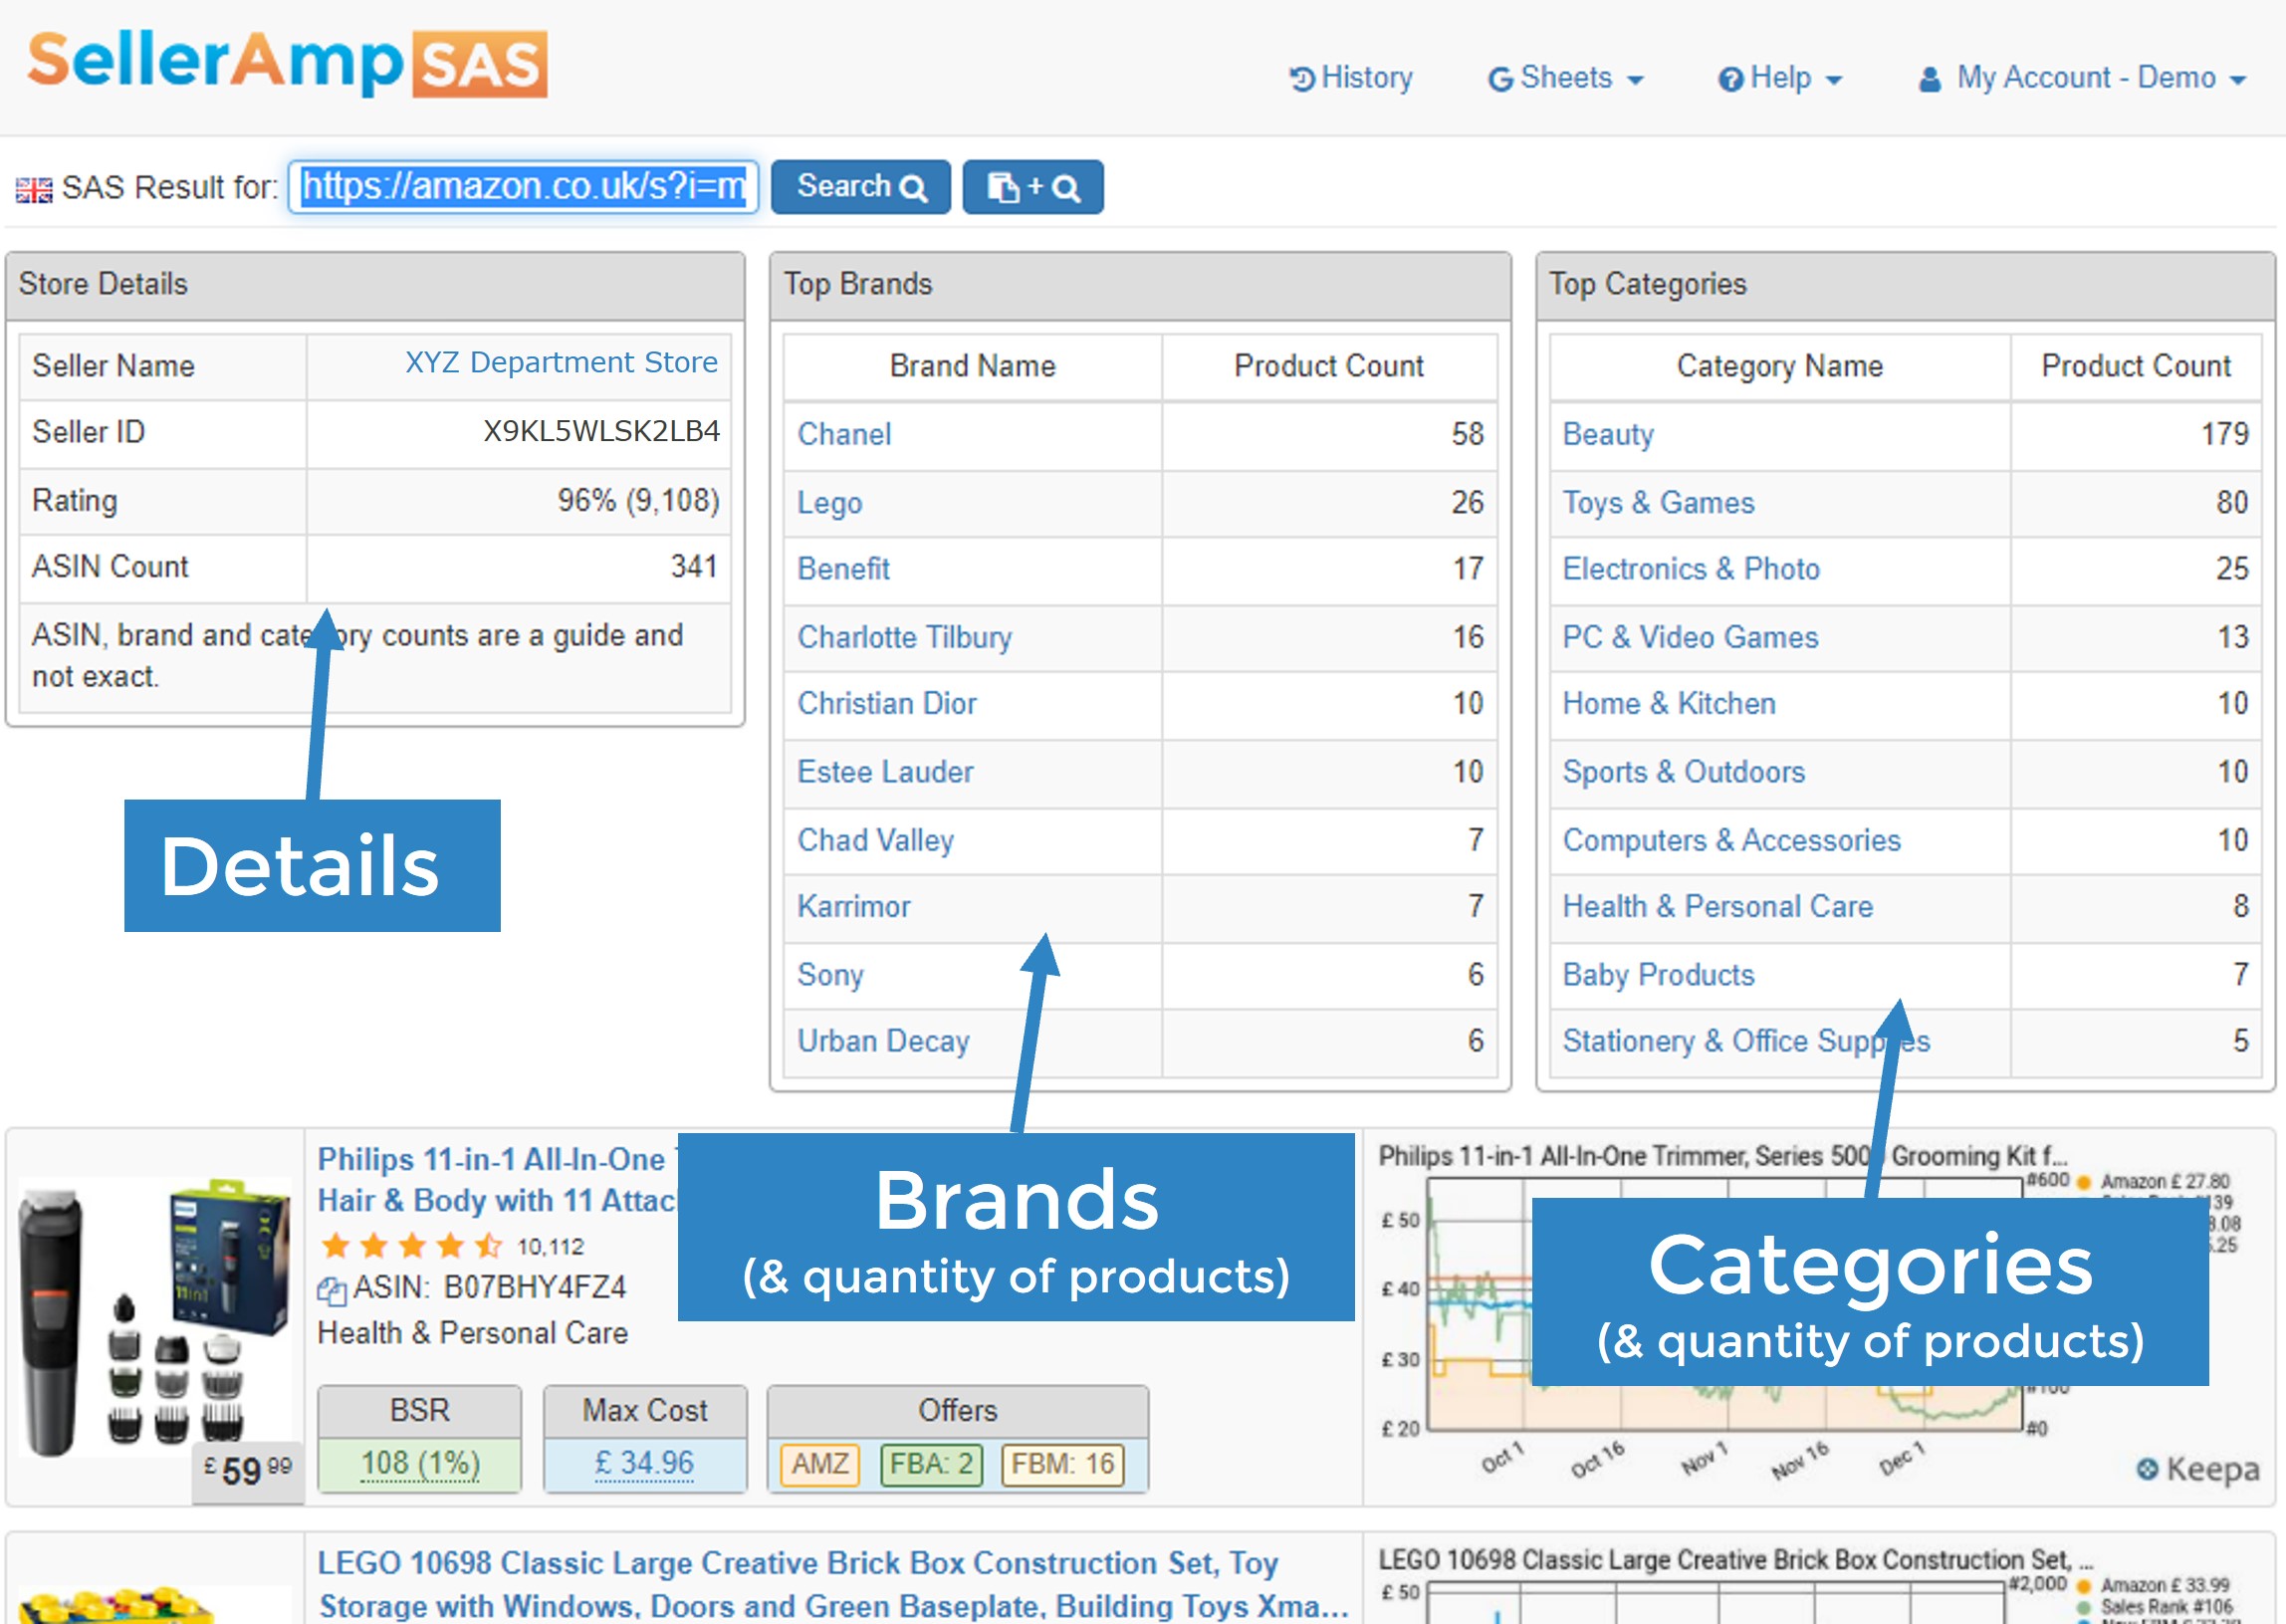 SAS Storefront Search - easily search other sellers' stores